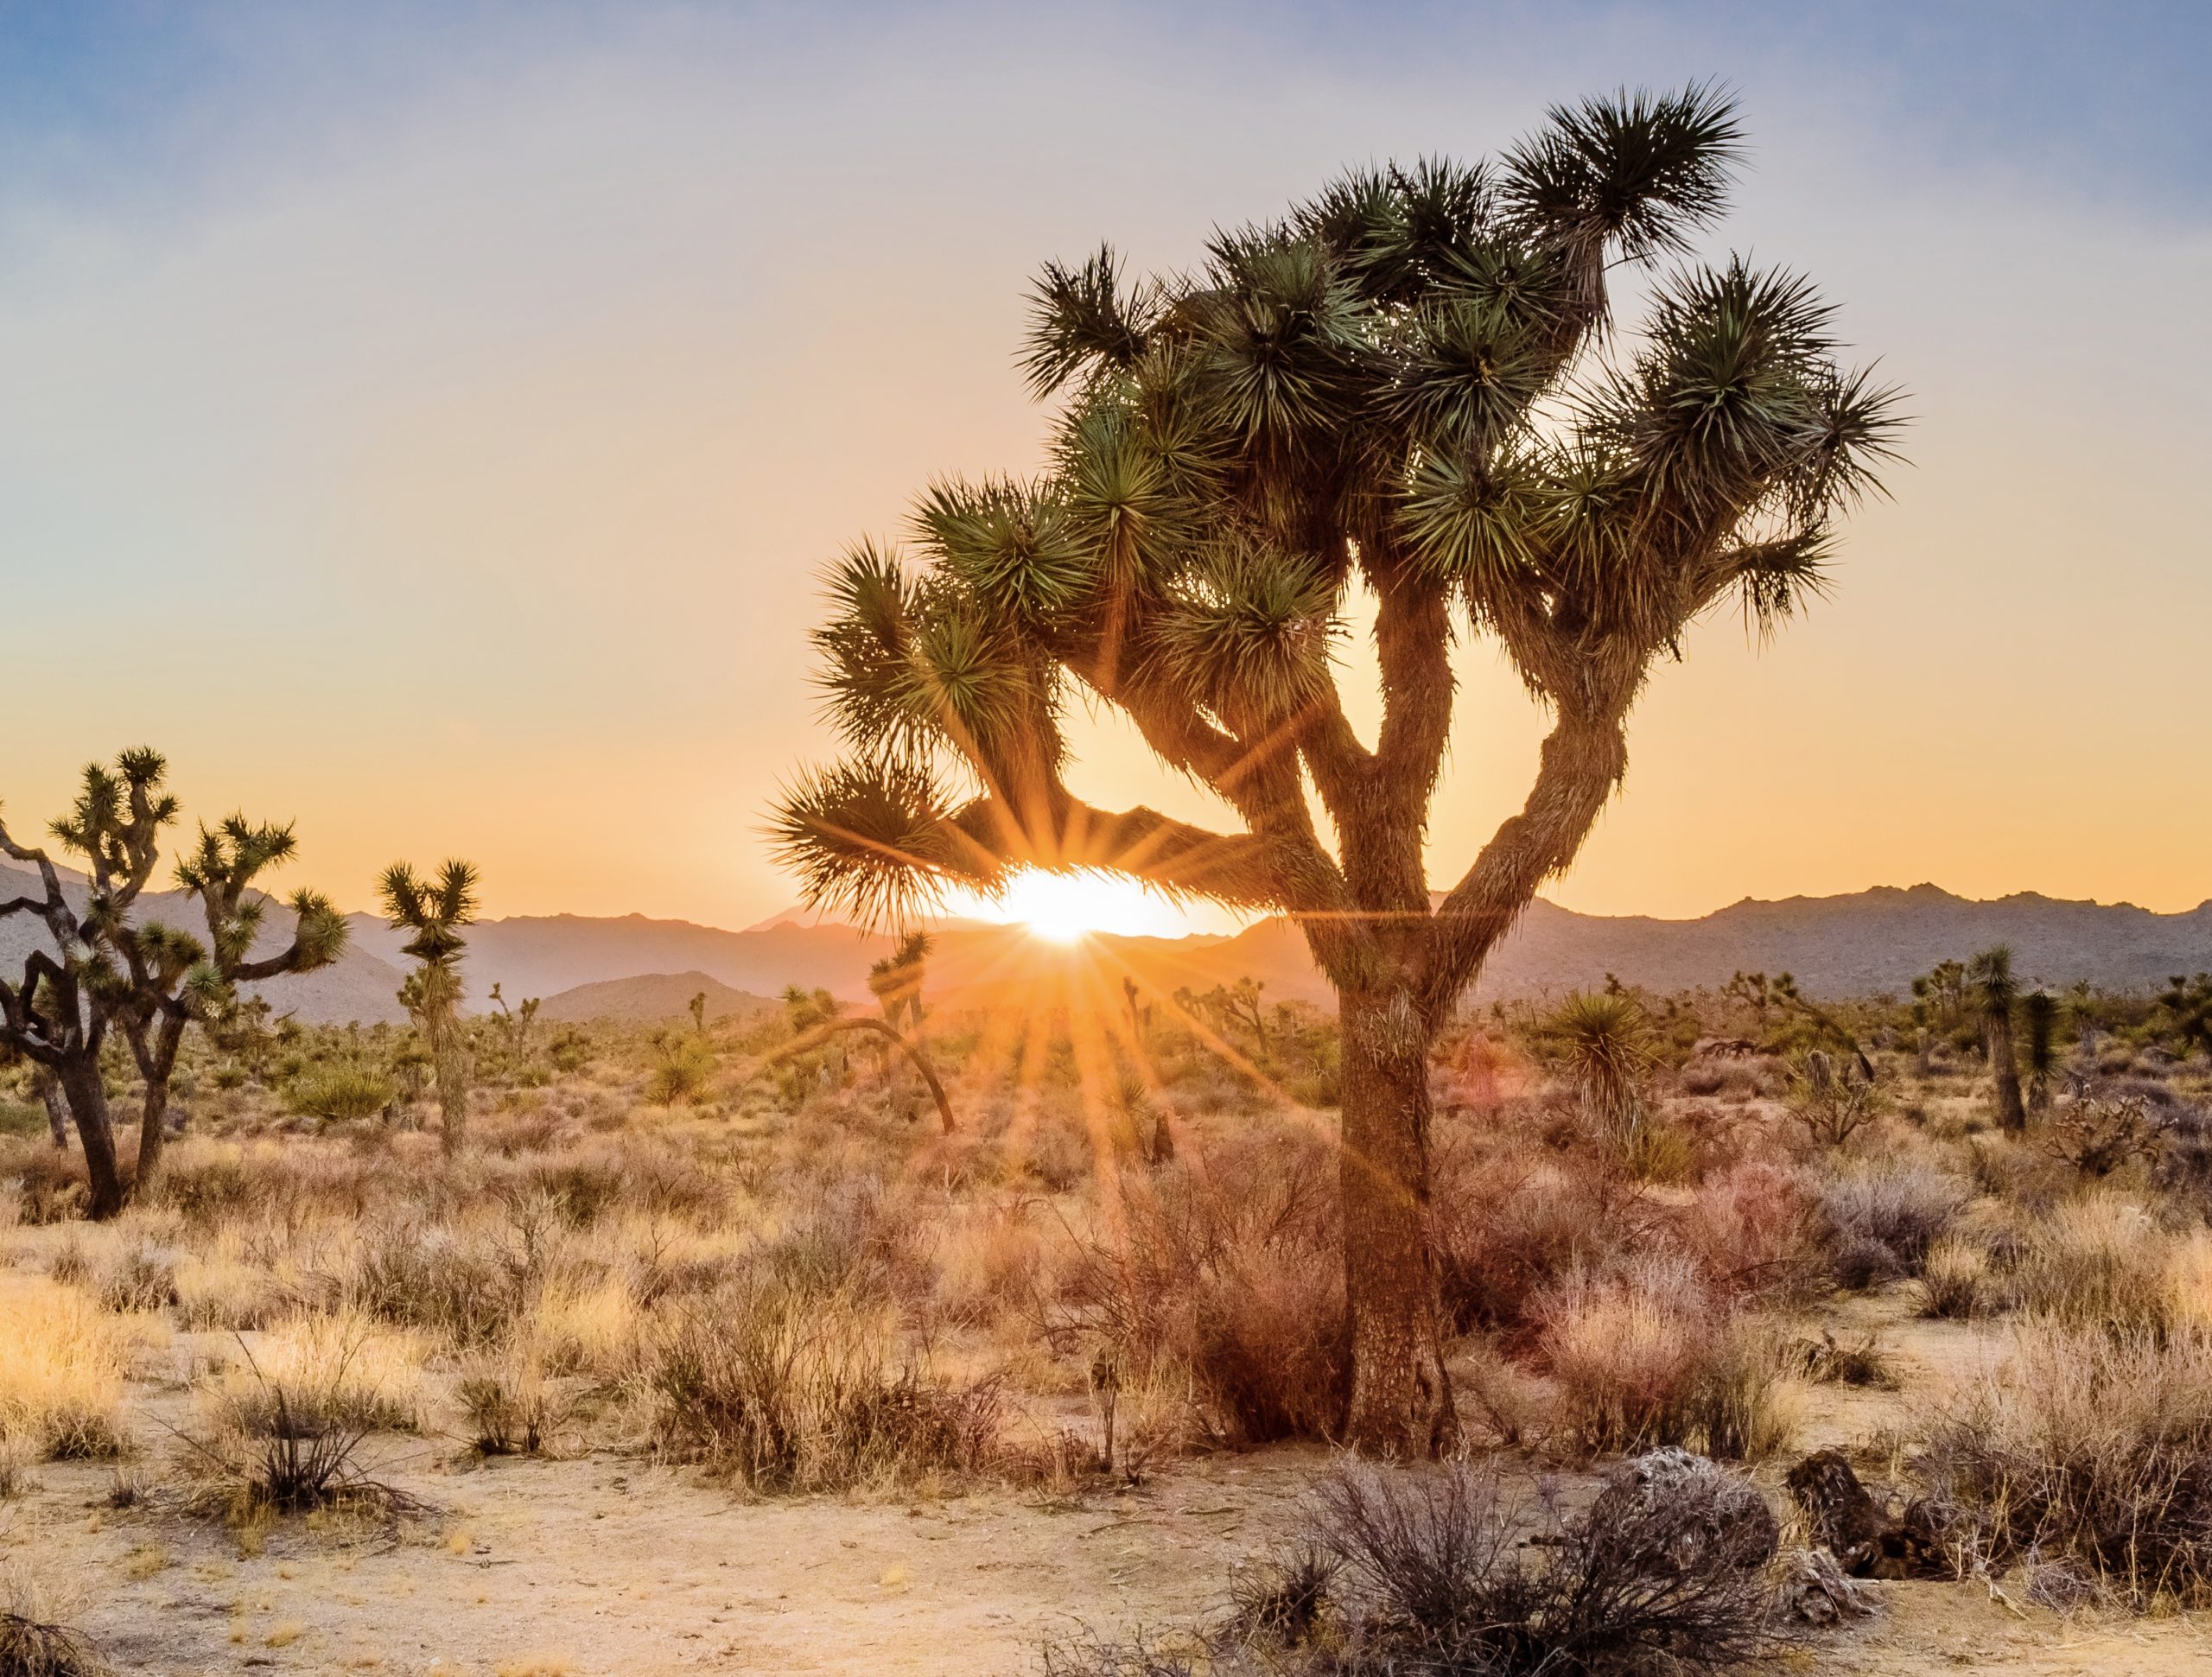 Breaking! Western Joshua Trees Are Now Protected Under California's